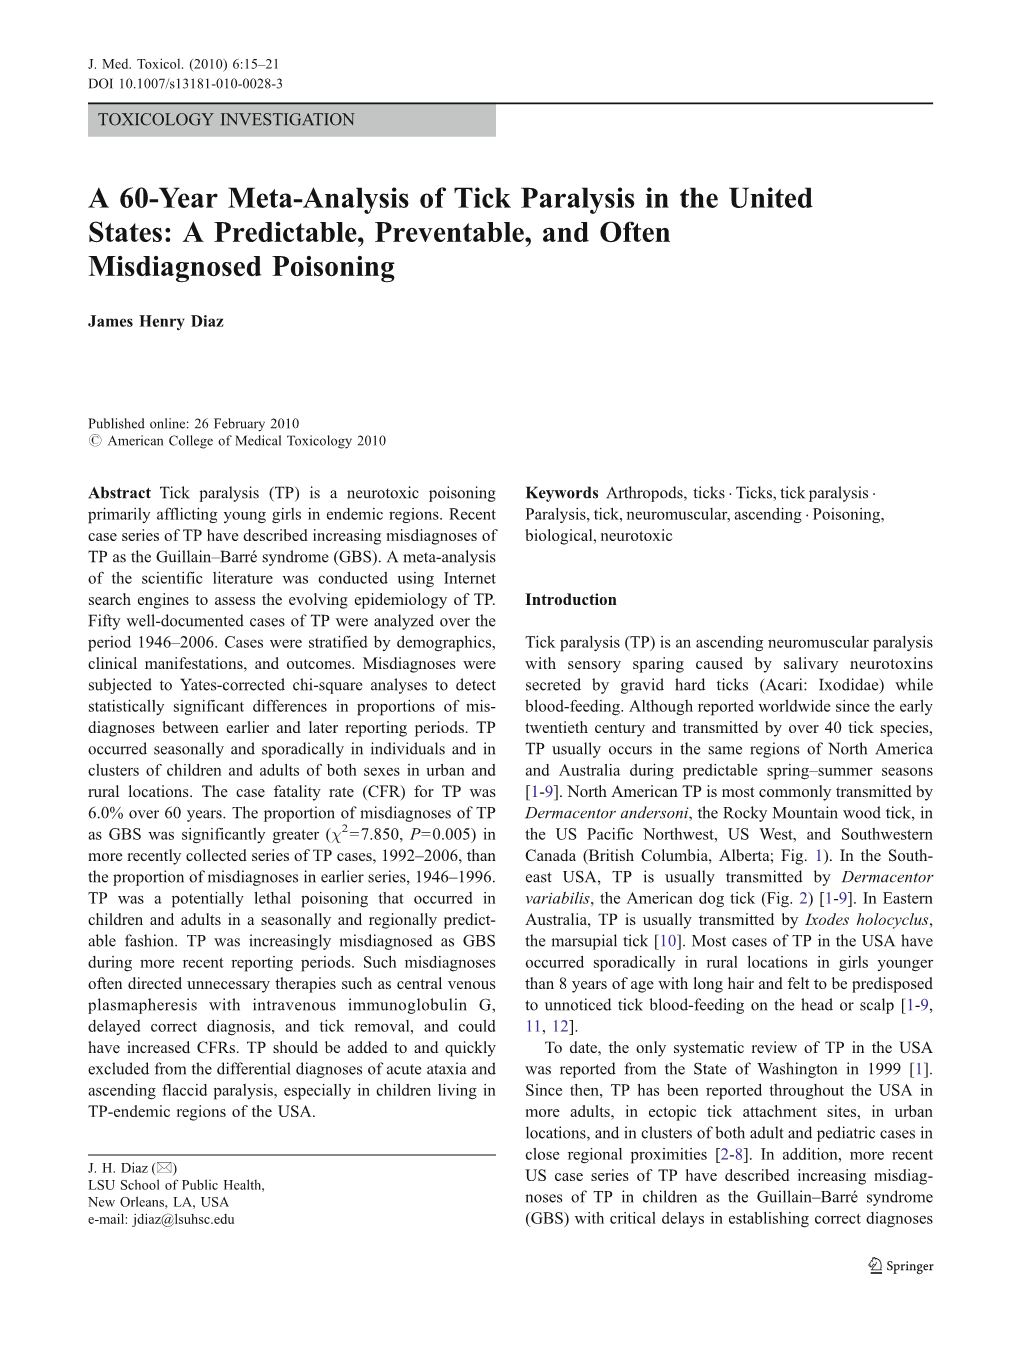 A 60-Year Meta-Analysis of Tick Paralysis in the United States: a Predictable, Preventable, and Often Misdiagnosed Poisoning